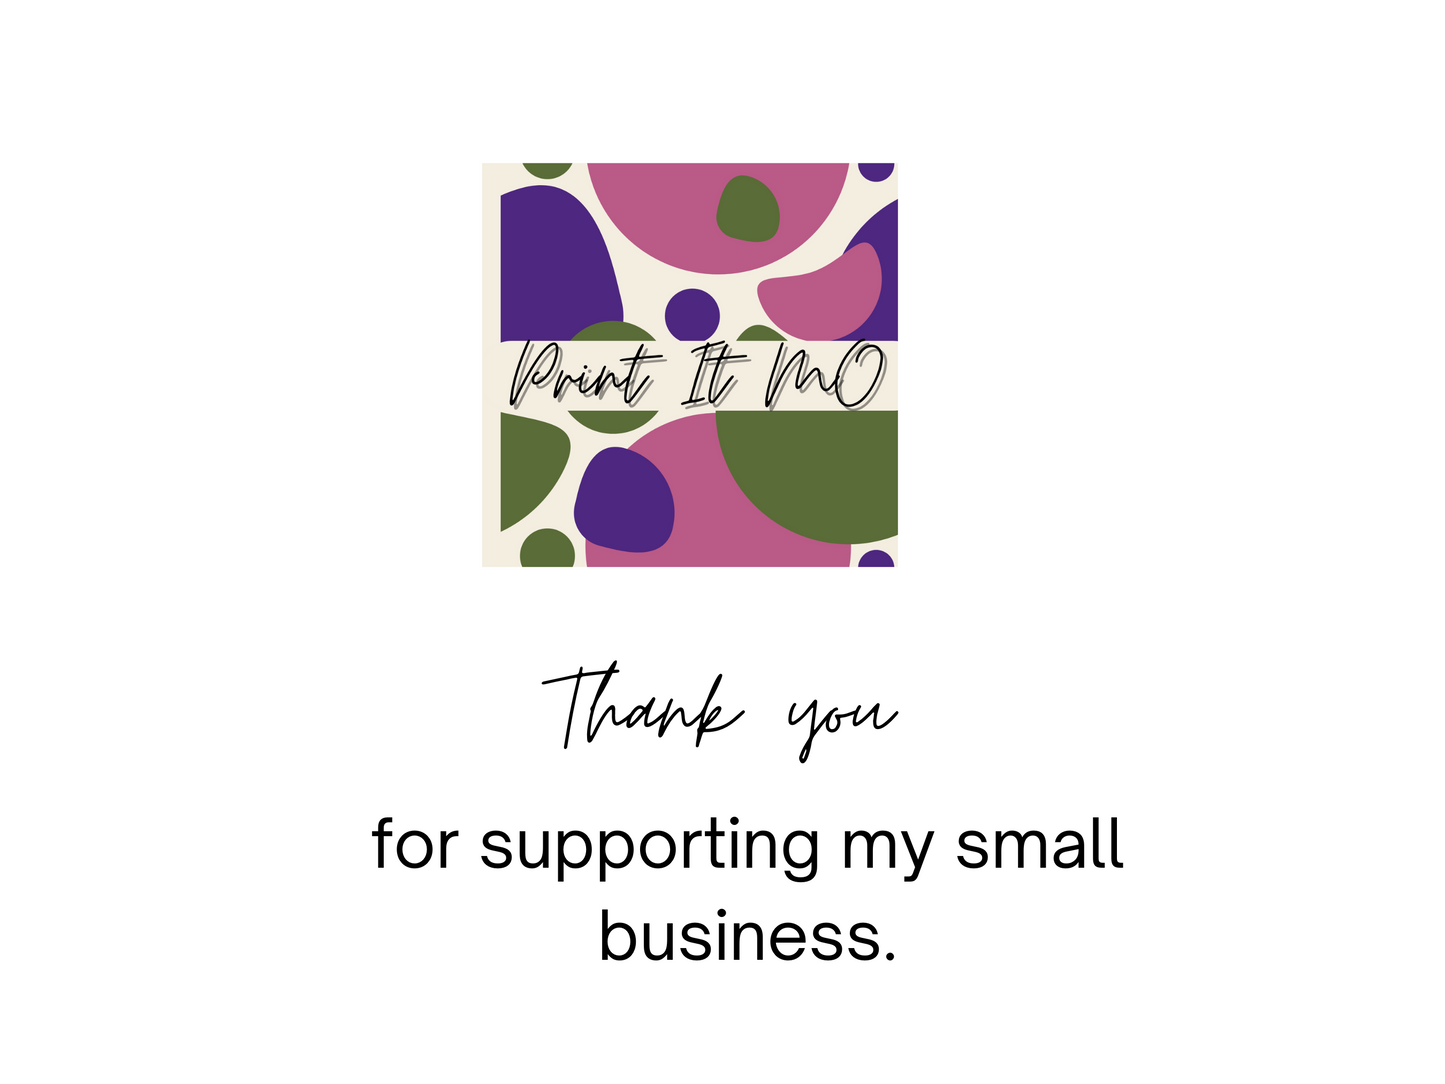 A thank you message with the Print It Mo logo.